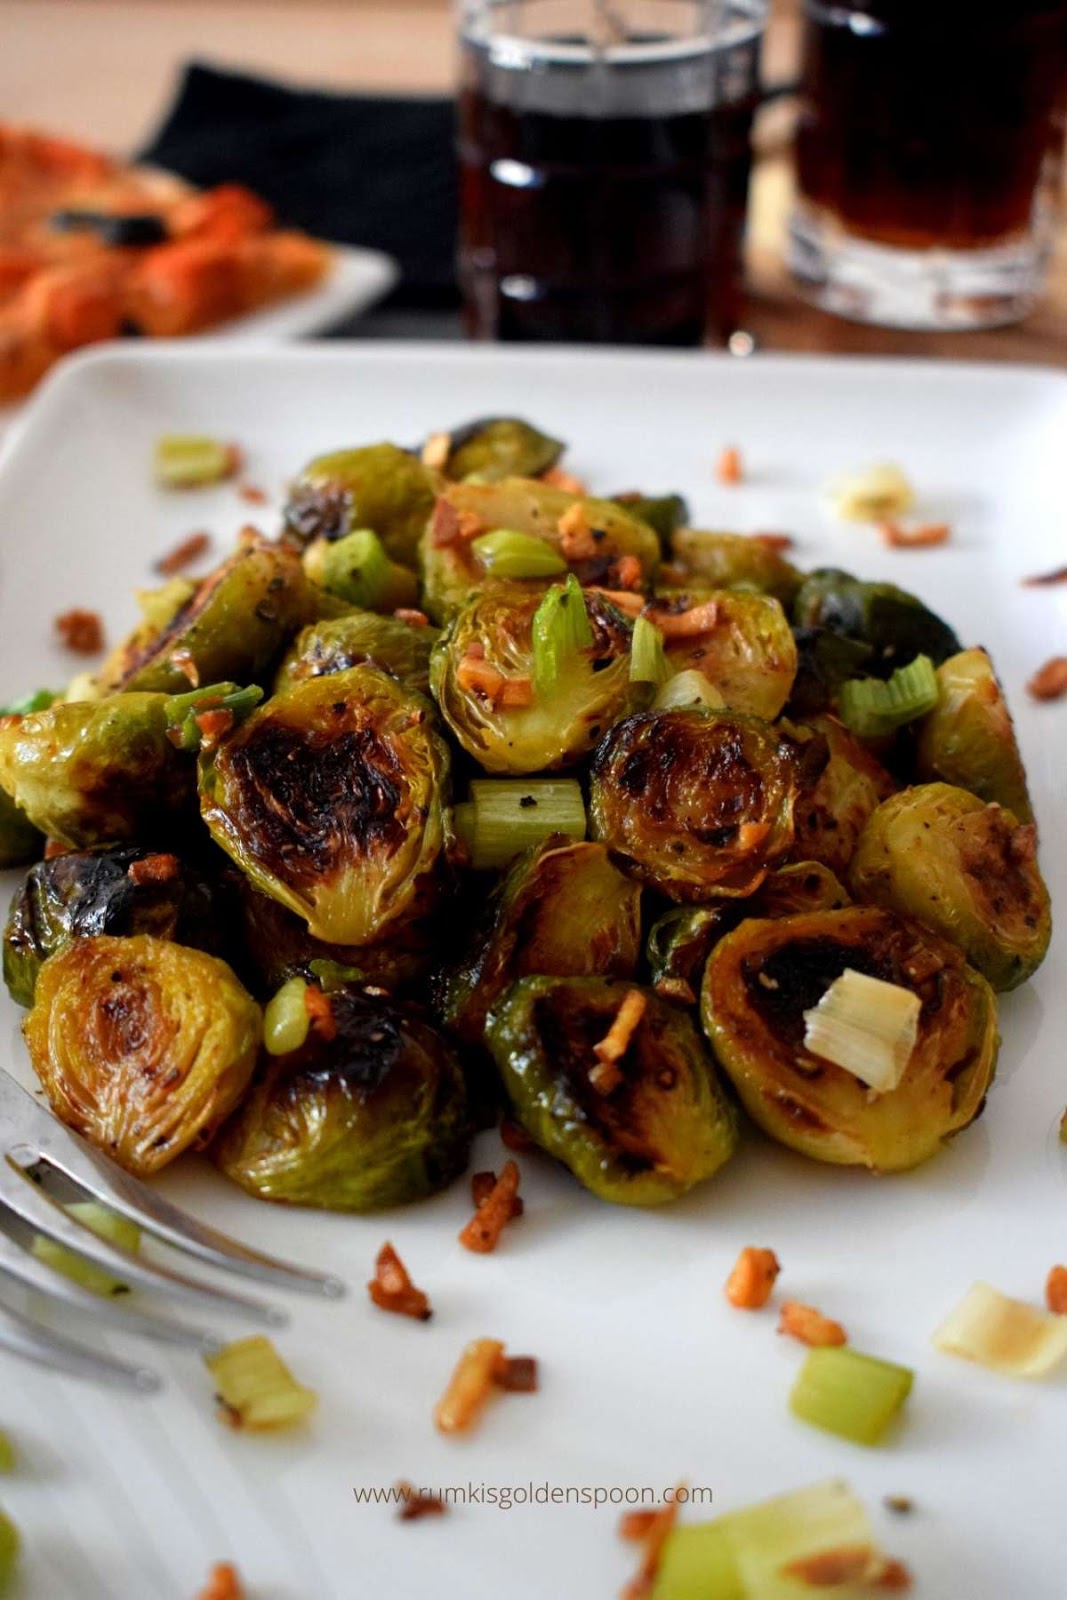 roasted brussels sprouts, roasted brussels sprouts recipe, roasted brussel sprouts, roasted brussel sprouts recipe, roasted brussel sprouts oven, roasted brussel sprouts garlic, how roast brussel sprouts, roasted brussel sprouts recipes, thanksgiving brussel sprouts, Rumki's Golden Spoon